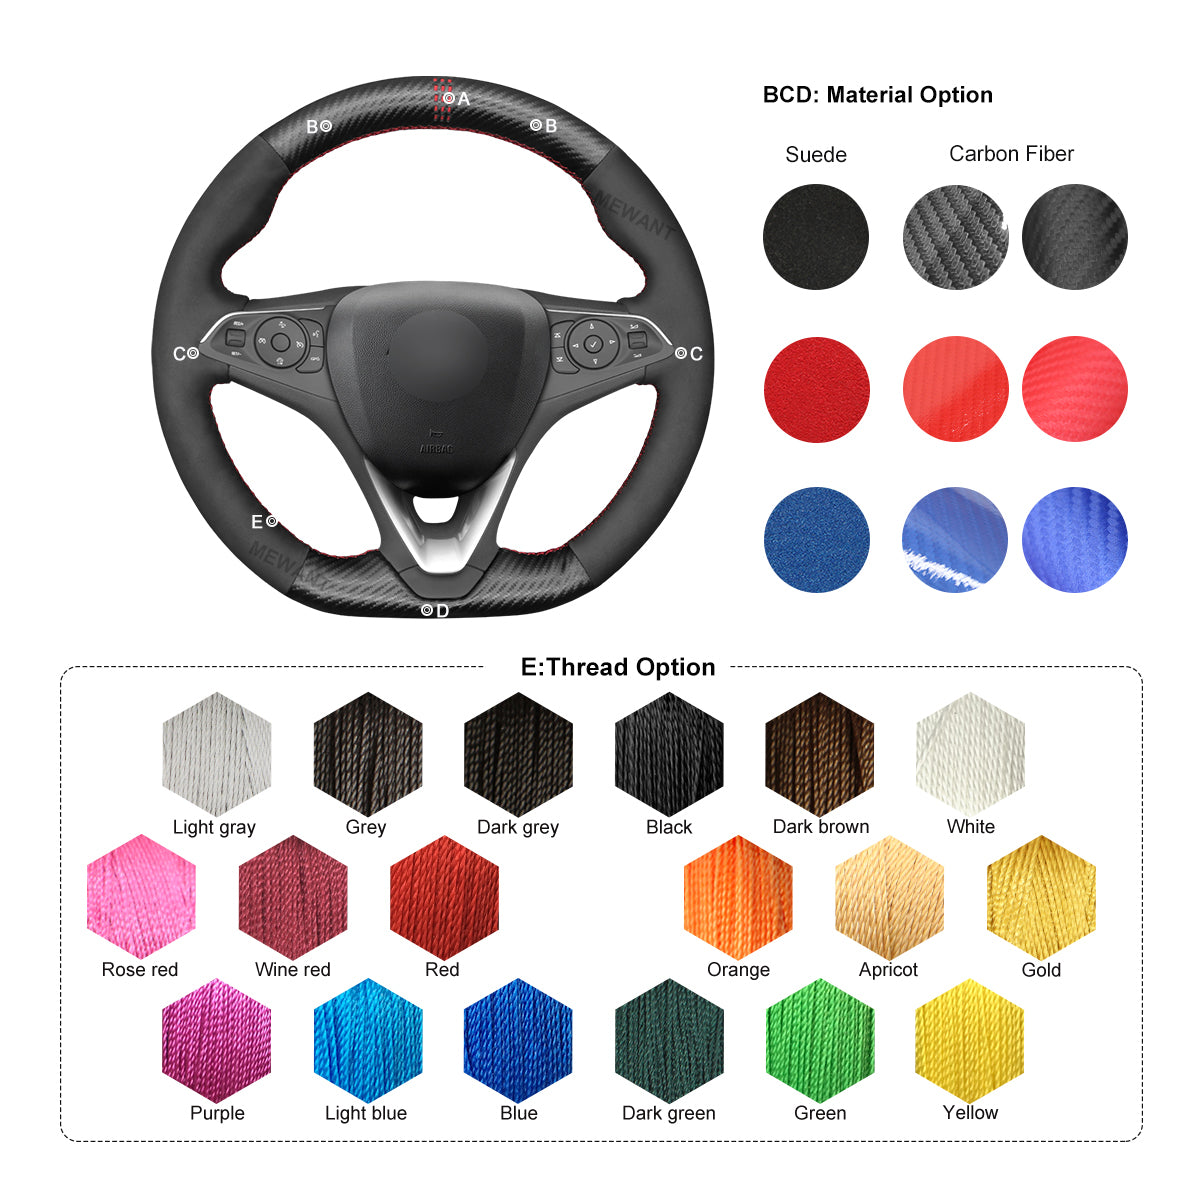 MEWANT Car Steering Wheel Cover for Opel Astra K Corsa F / VauxhallAstra K Corsa F Grandland X Insignia / for Holden Calais Commodore